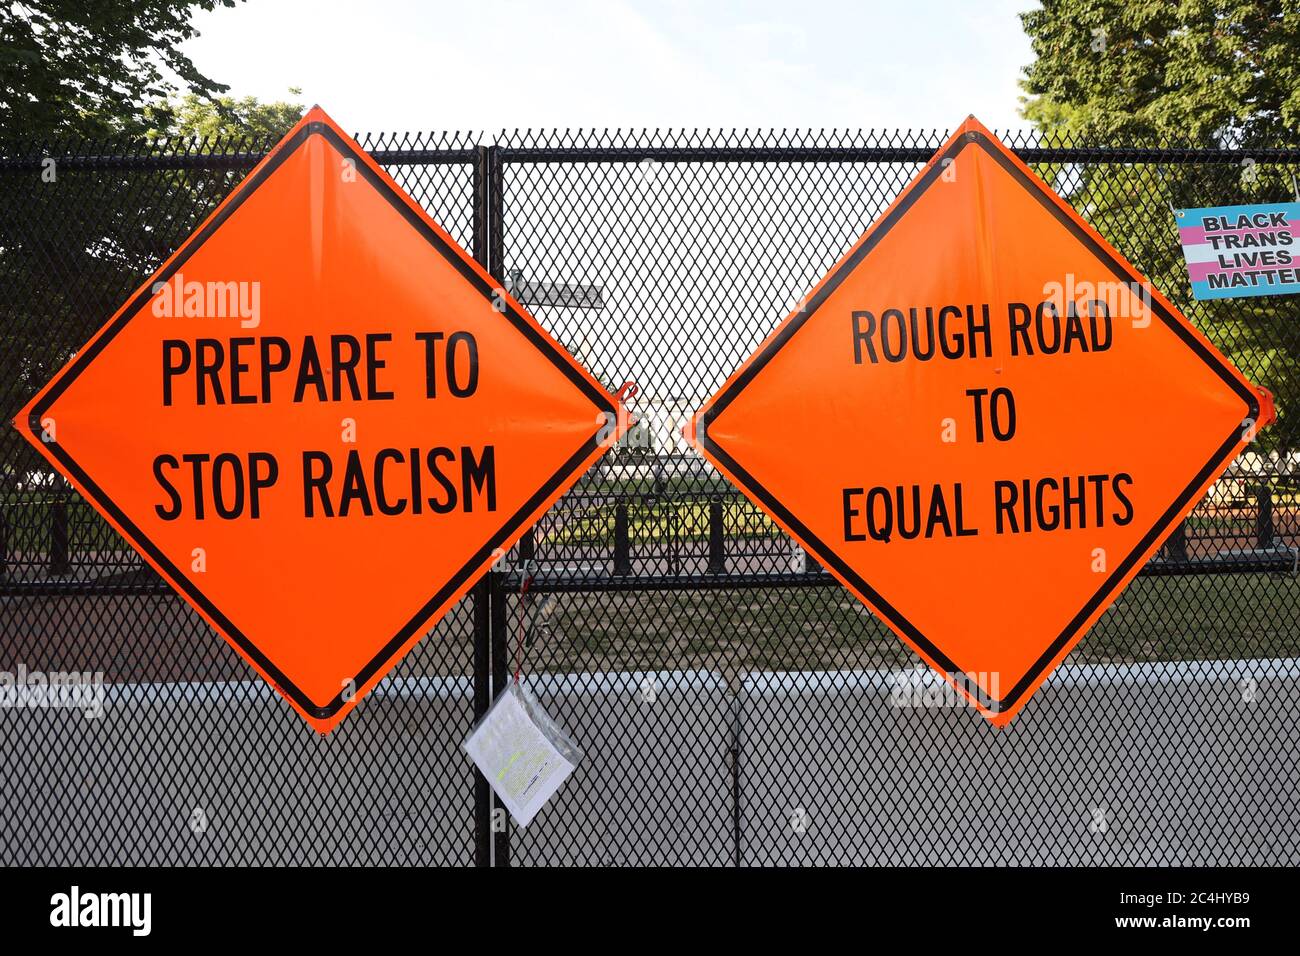 Washington, DC, USA. 27th June, 2020. View Of Black Lives Matters Plaza with signs reading 'Prepare To Stop Racism' and 'Rough Road To Equal Rights' in Advance of Another Busy Weekend in Washington, DC on June 27, 2020. Credit: Mpi34/Media Punch/Alamy Live News Stock Photo